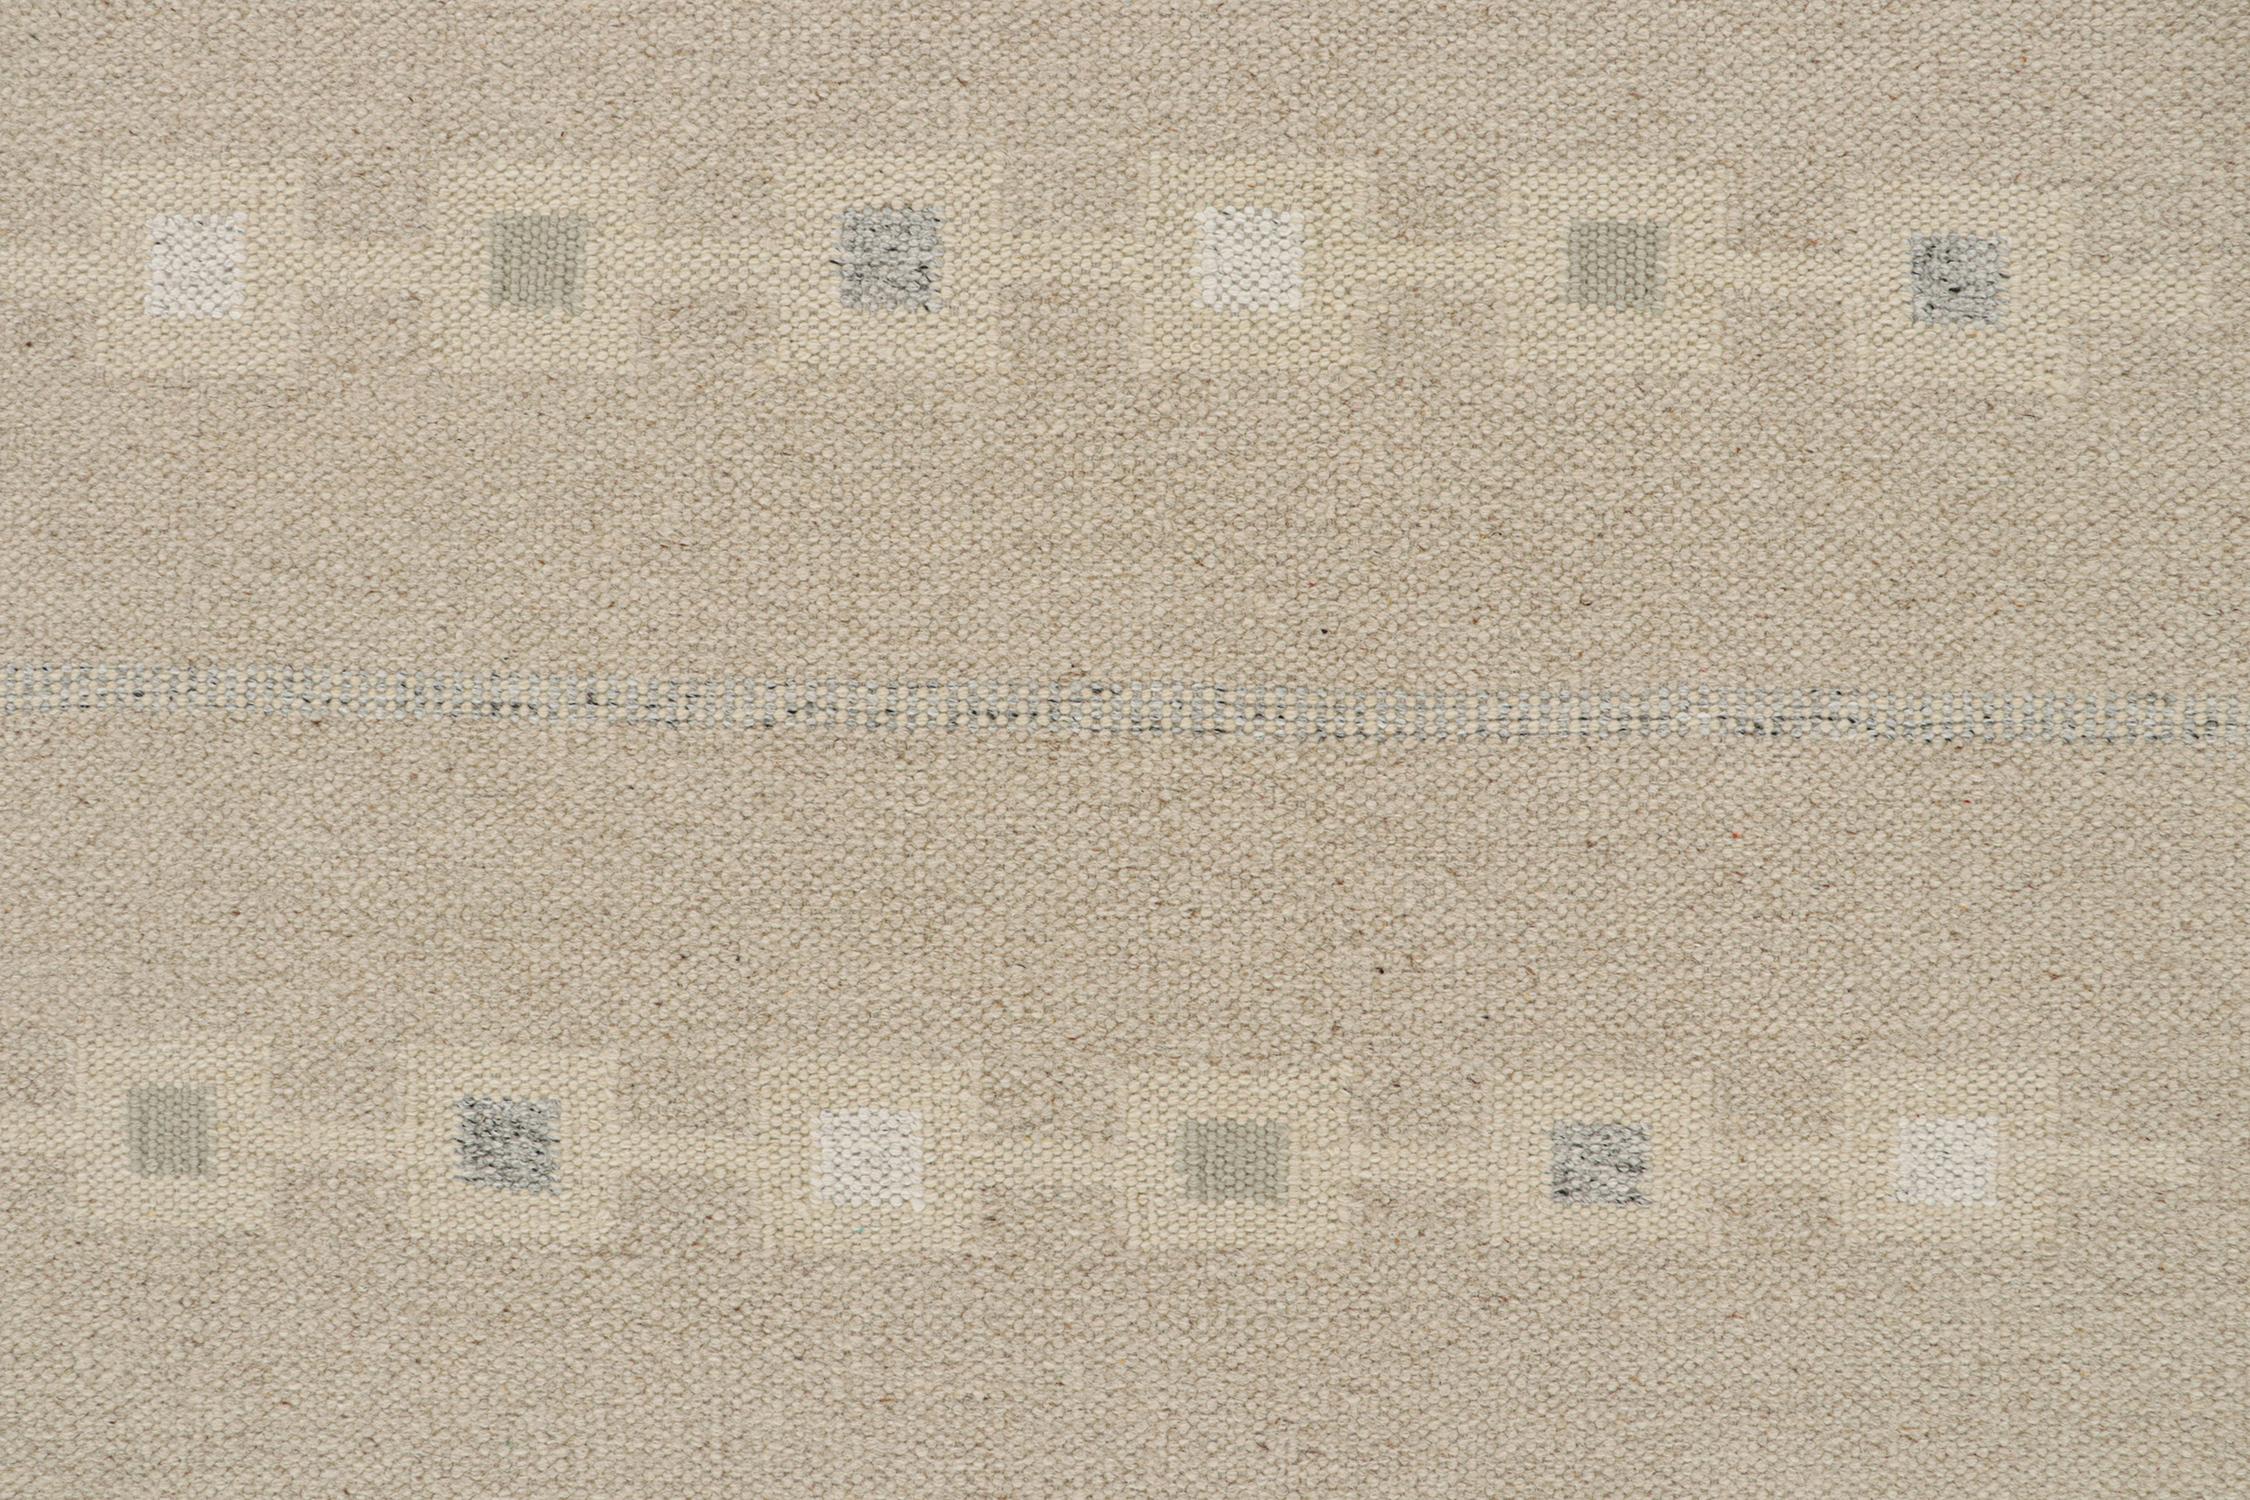 Rug & Kilim’s Scandinavian Style Kilim Rug in Beige and Grey Geometric Patterns In New Condition For Sale In Long Island City, NY